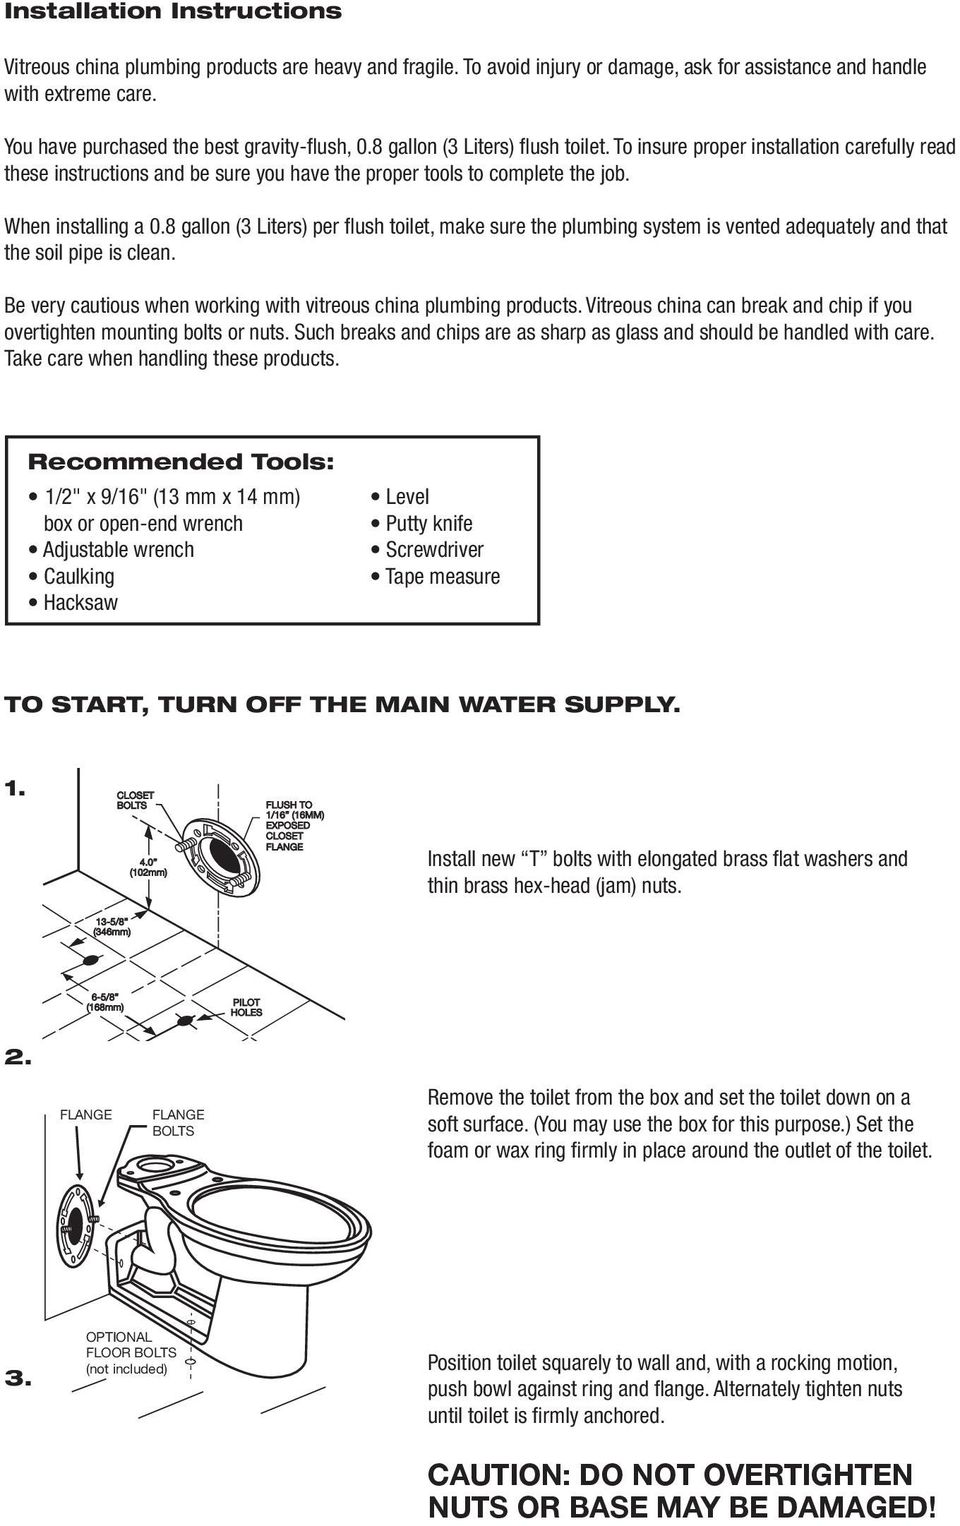 To insure proper installation carefully read these instructions and be sure you have the proper tools to complete the job. When installing a 0.